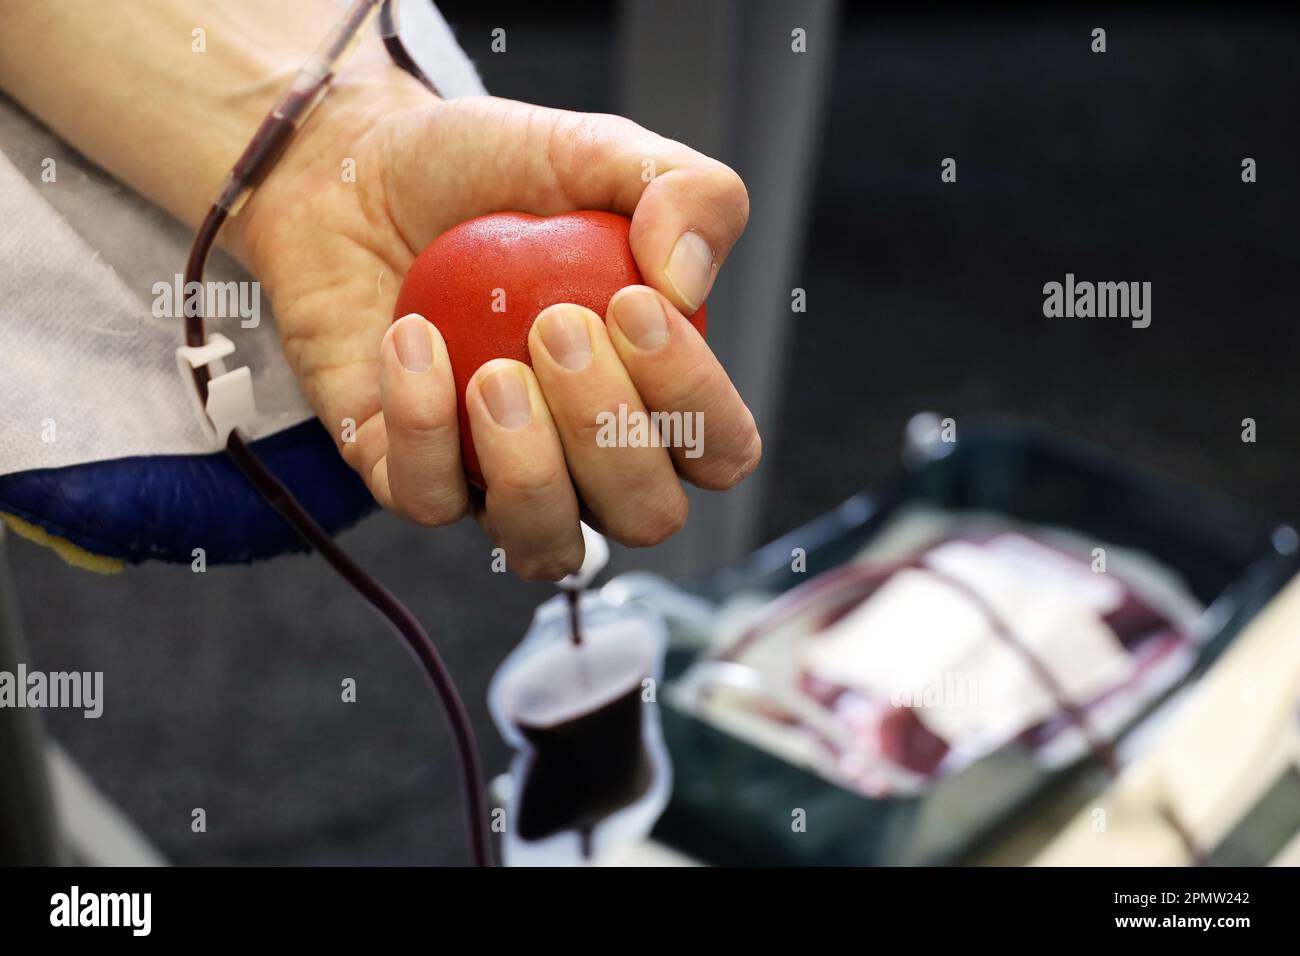 Man blood donor in chair during donation with red bouncy ball in hand, selective focus. Concept of donorship, transfusion, health care Stock Photo